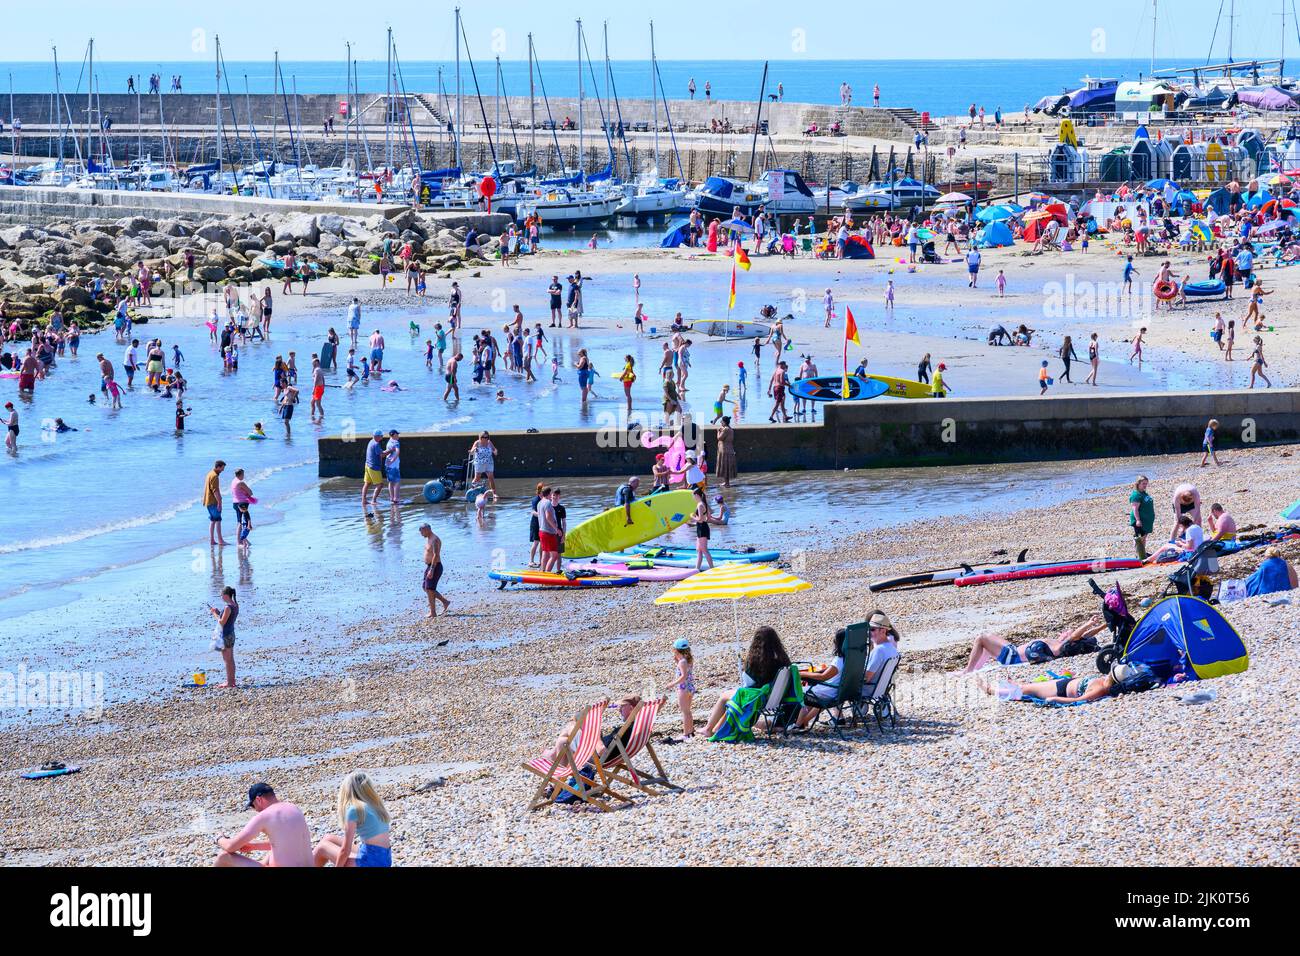 Lyme Regis, Dorset, UK. 29th July, 2022. UK Weather: Crowds of holidaymakers and sunbathers flock to the packed beach at the seaside resort of Lyme Regis to bask in scorching hot sunshine. Families, staycationers and sunseekers soaked up the lovely sunny weather as it made a welcome return in time for the weekend. Credit: Celia McMahon/Alamy Live News Stock Photo